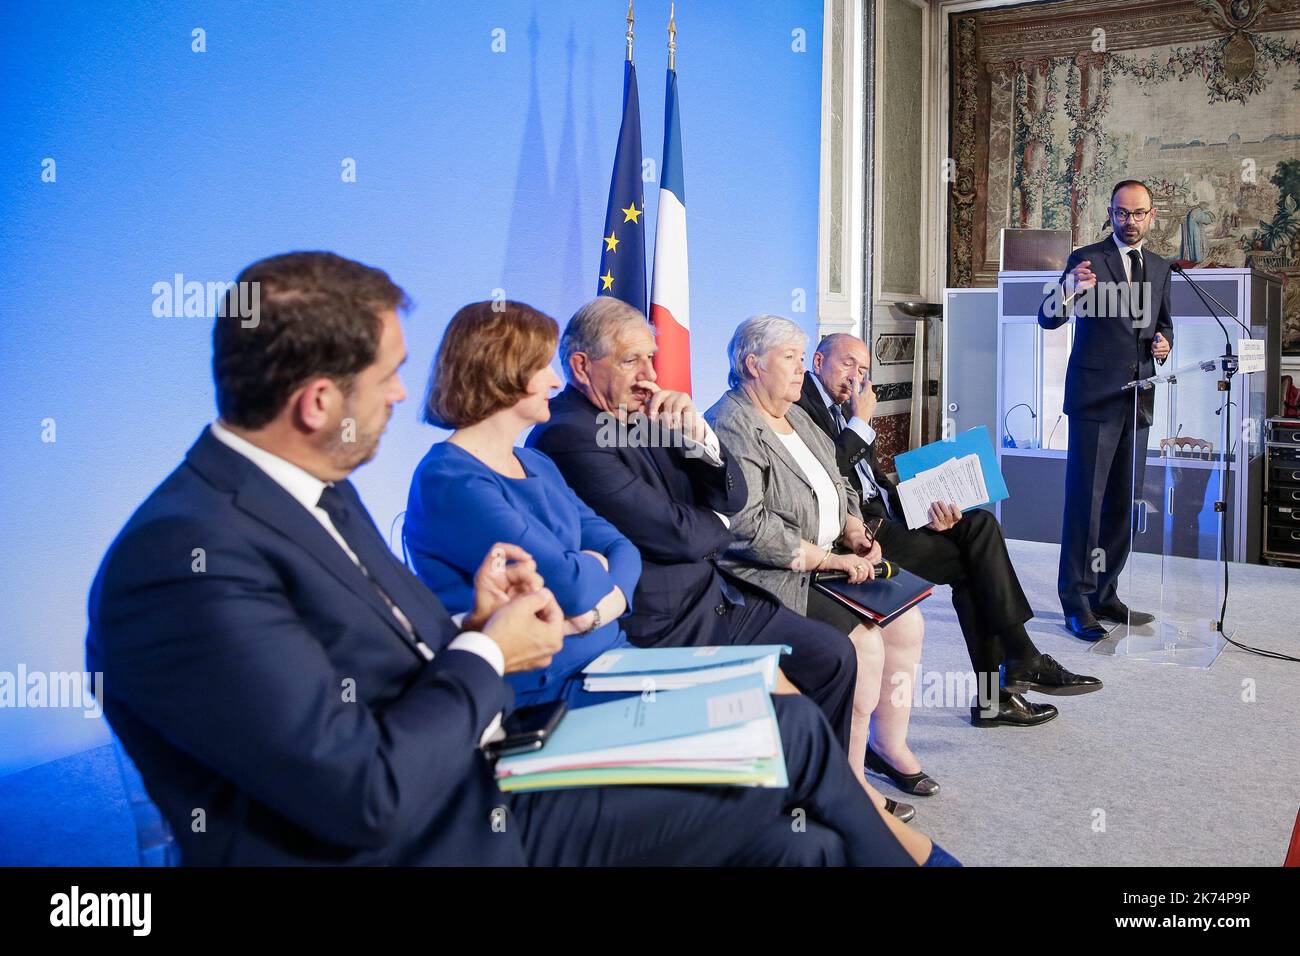 THE PRIME MINISTER EDOUARD PHILIPPE PRESENTS THE PLAN OF ACTION TO GUARANTEE THE RIGHT OF ASYLUM AND BETTER TO MAINTAIN MIGRATION FLOWS AT THE HOTEL DE MARIGNY. IN THE PRESENCE OF CHRISTOPHE CASTANER, SECRETARY OF STATE FOR RELATIONS WITH PARLIAMENT, NATHALIE LOISEAU, MINISTER FOR EUROPEAN AFFAIRS, JACQUES MEZARD, MINISTER FOR THE COHESION OF TERRITORIES, JACQUELINE GOURAULT, MINISTER FOR THE MINISTER OF THE INTERIOR, GERARD COLLOMB , MINISTER OF THE INTERIOR. Stock Photo